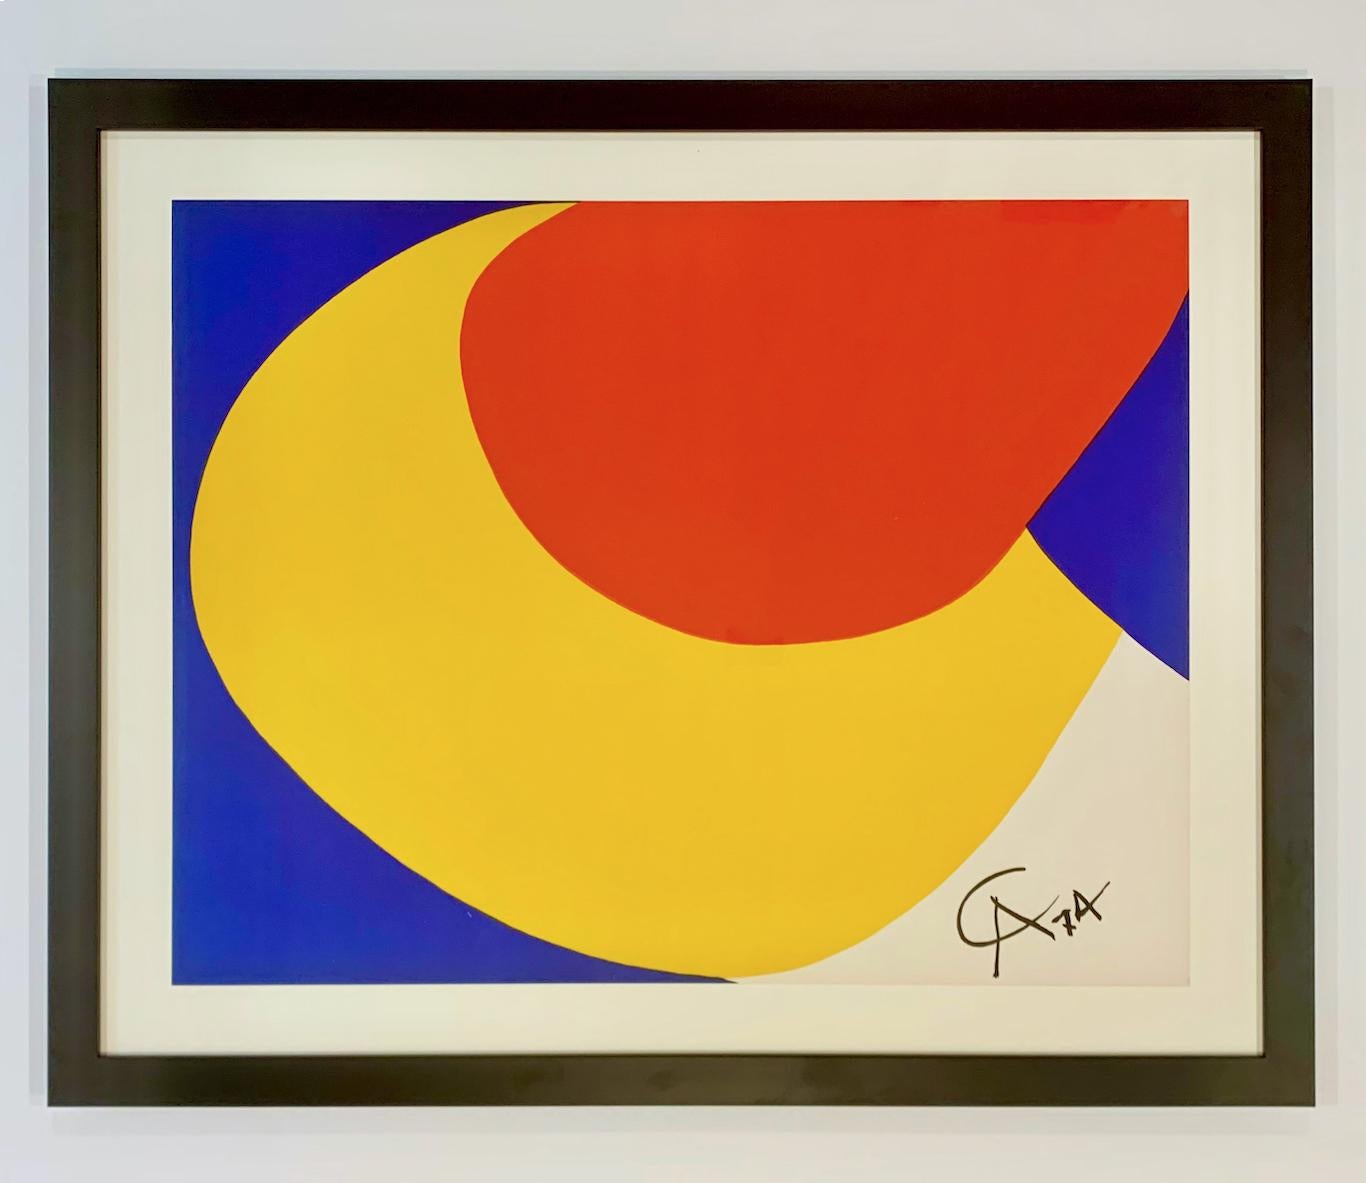 Alexander Calder Convection
Artist: Alexander Calder
Medium: Original lithograph
Title: Convection
Portfolio: Flying Colors
Year: 1974
Edition: Open
Signed: In the stone
Framed Size: 33